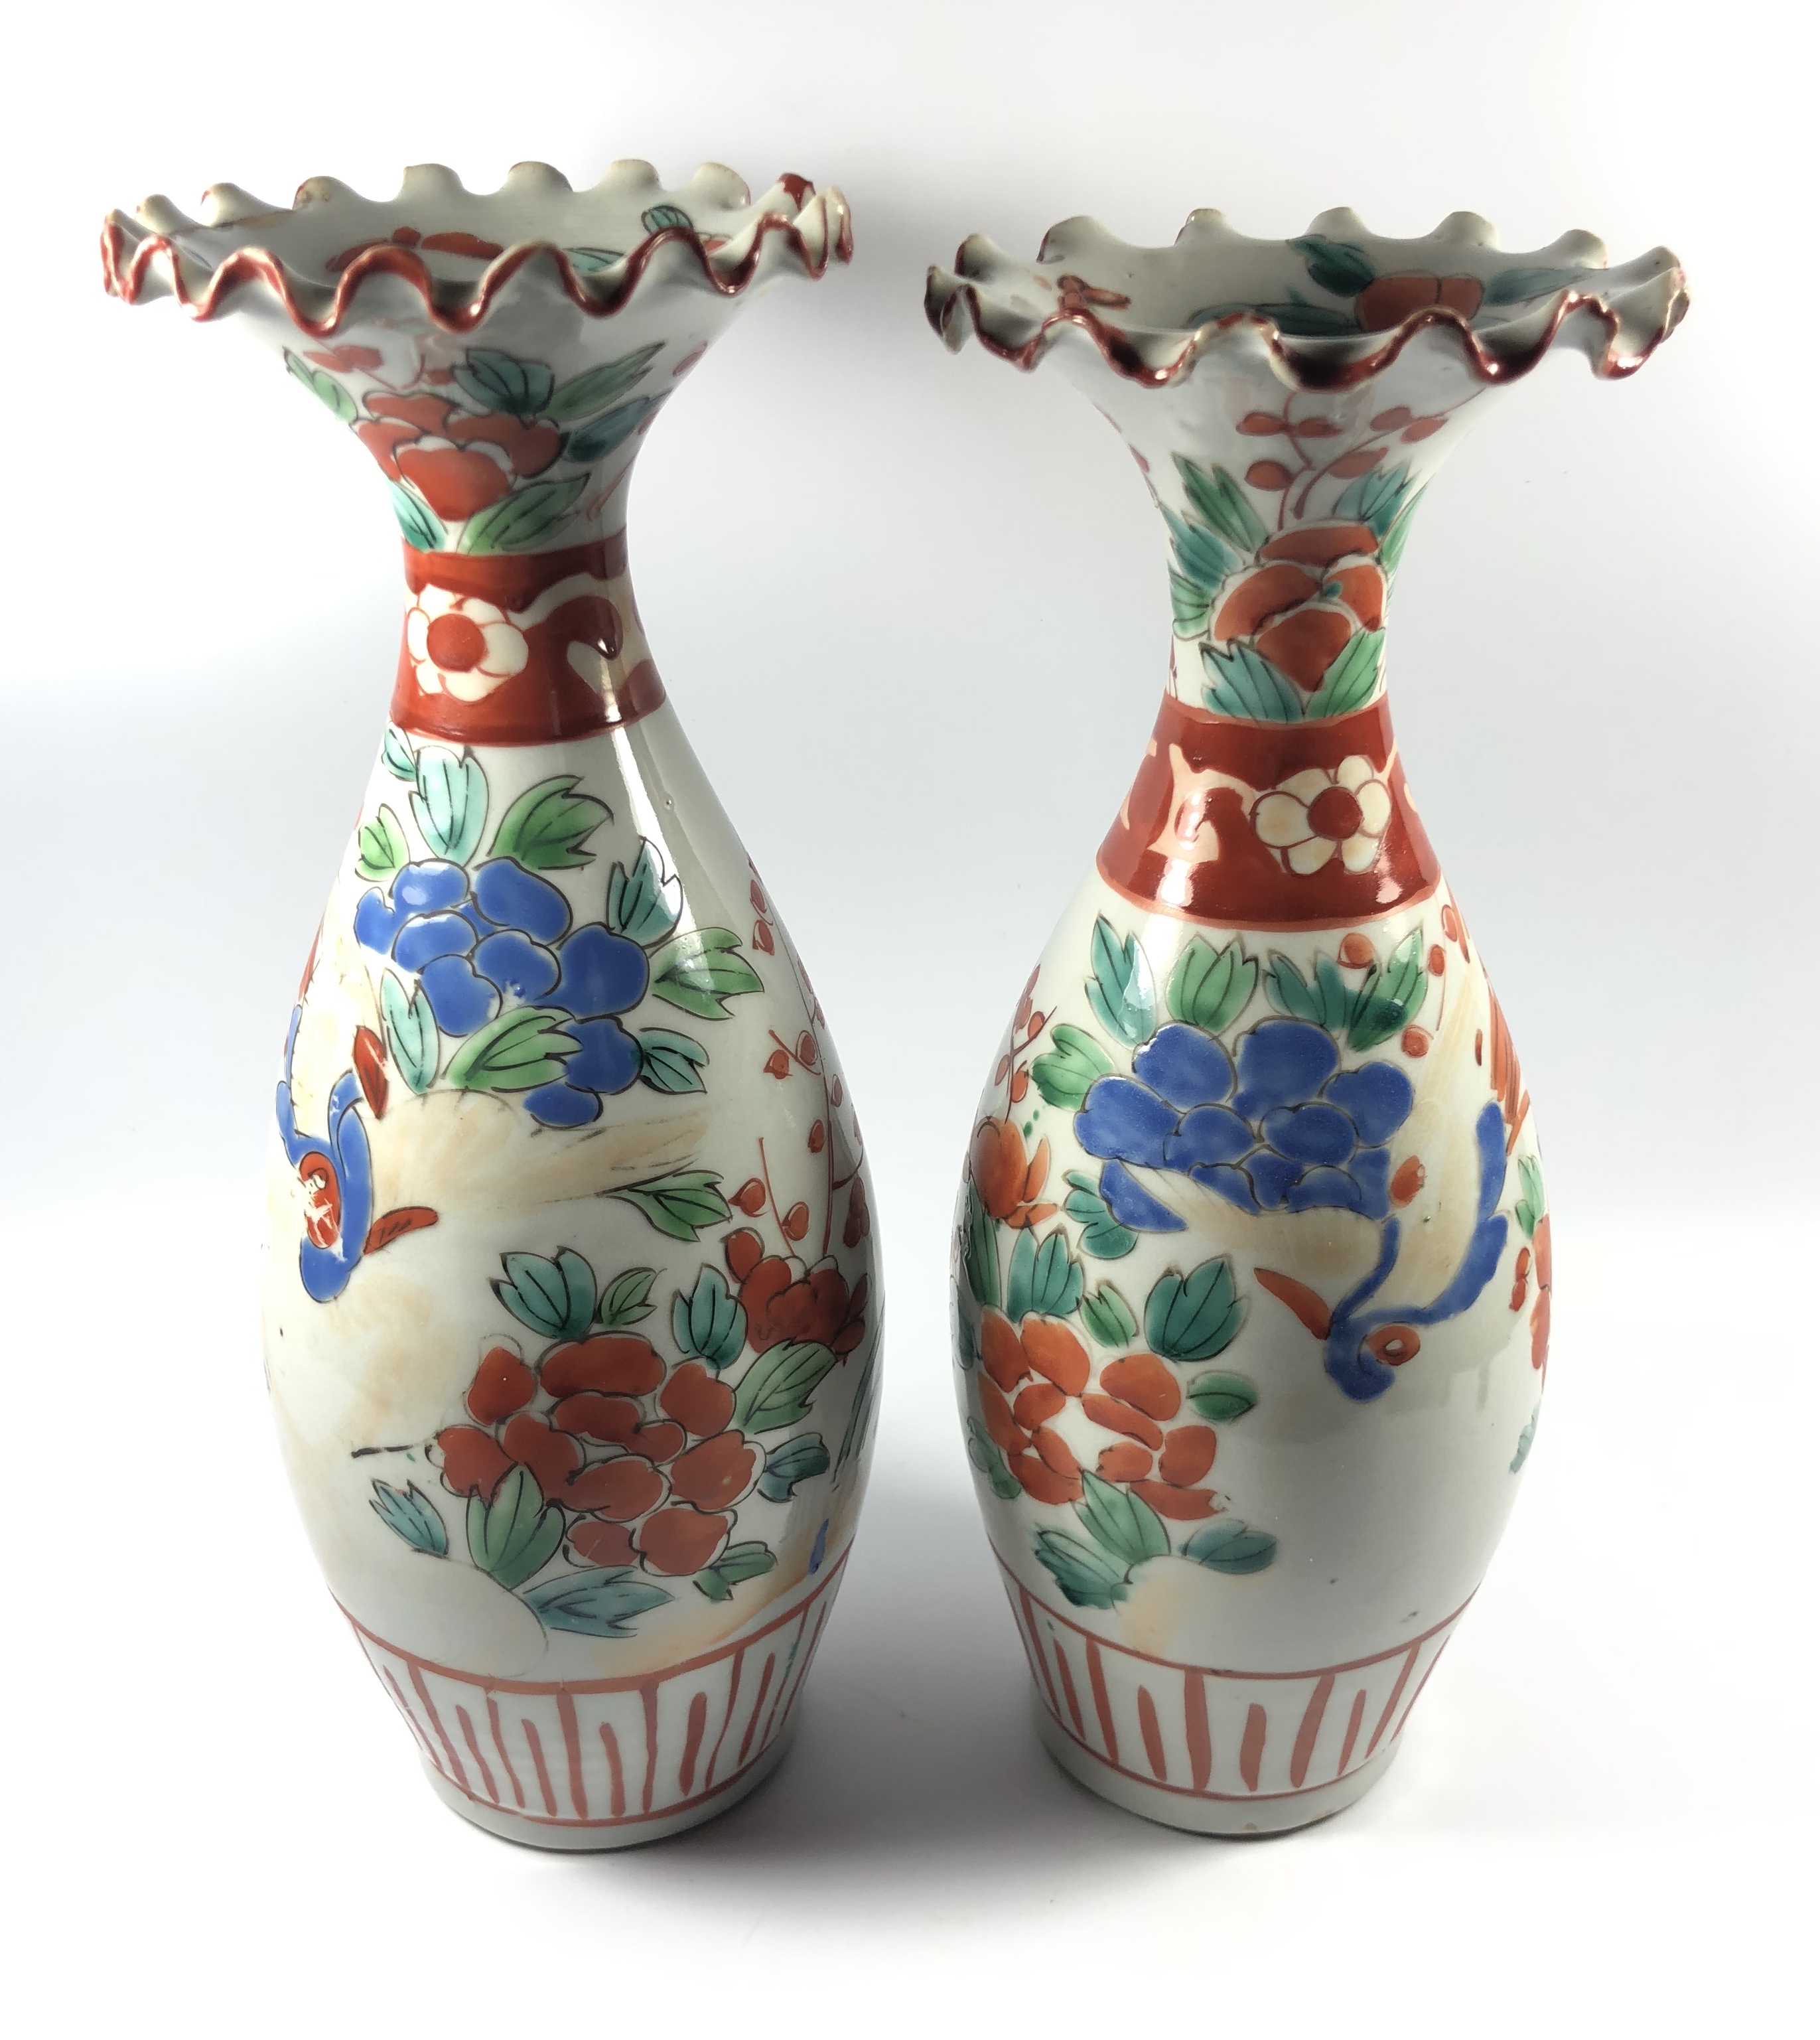 A PAIR OF JAPANESE MEIJI PERIOD IMARI BALUSTER FORM VASES, HEIGHT 25.5CM